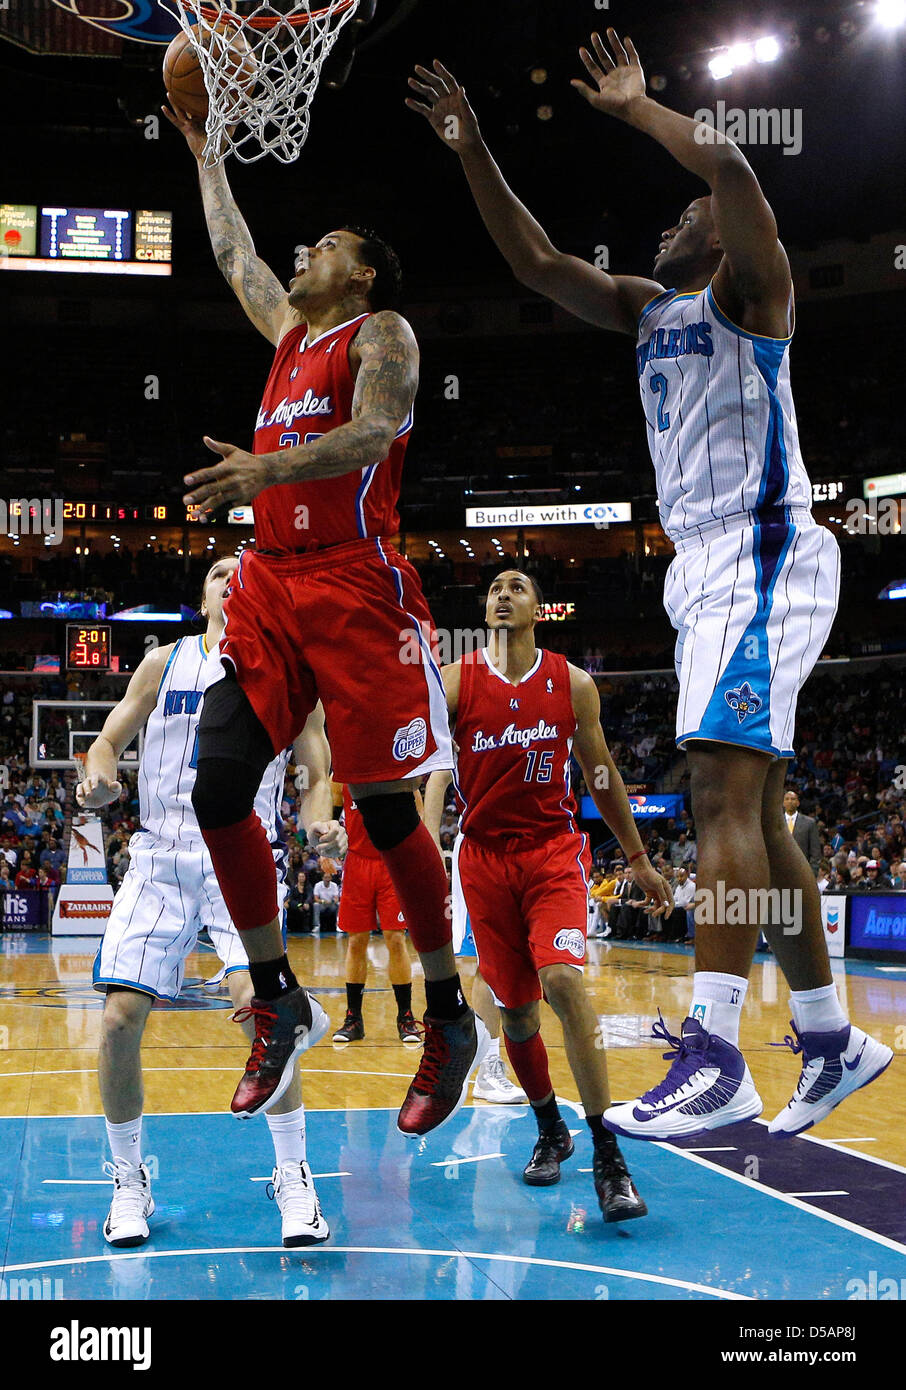 Matt Barnes of the Long Beach Jam scored 28 points during 139-129 News  Photo - Getty Images